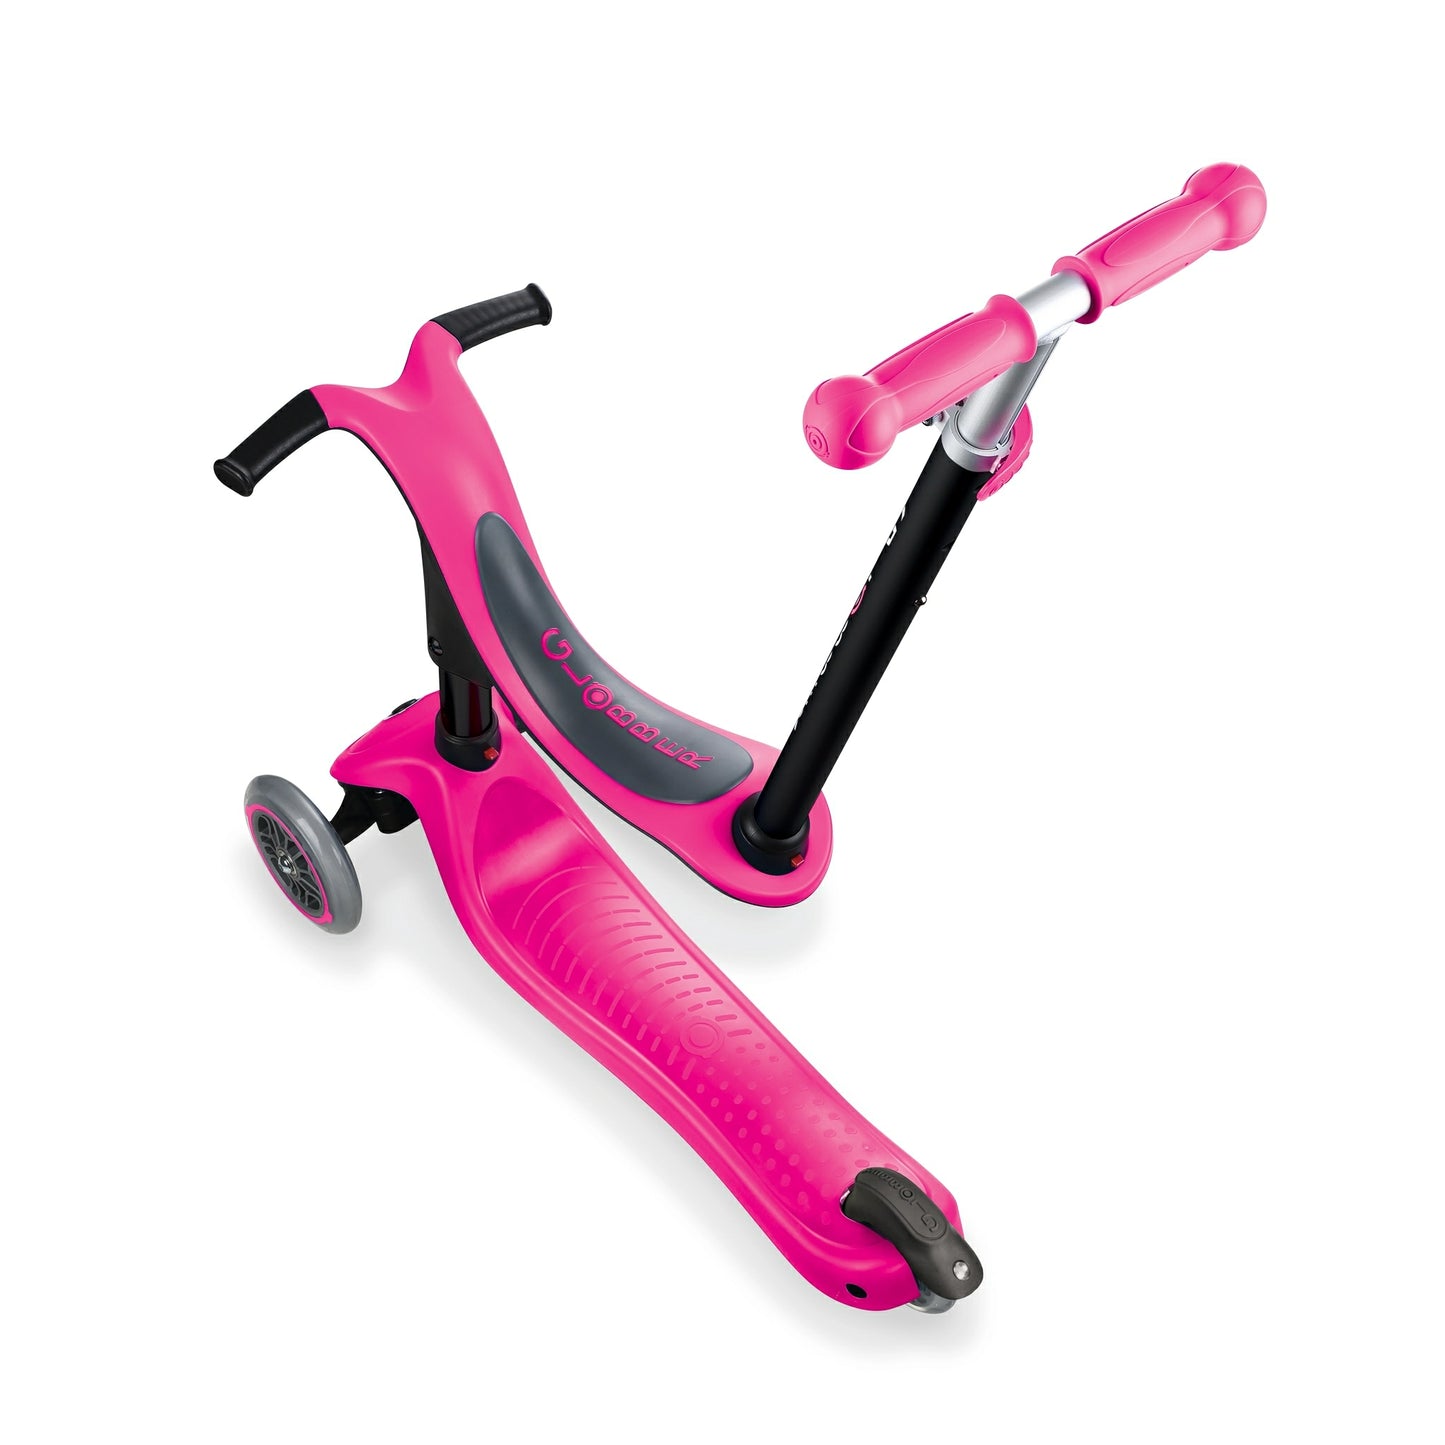 Monopattino 3 in 1 Go-Up Sporty, Deep Pink - Globber - Art. 451-110